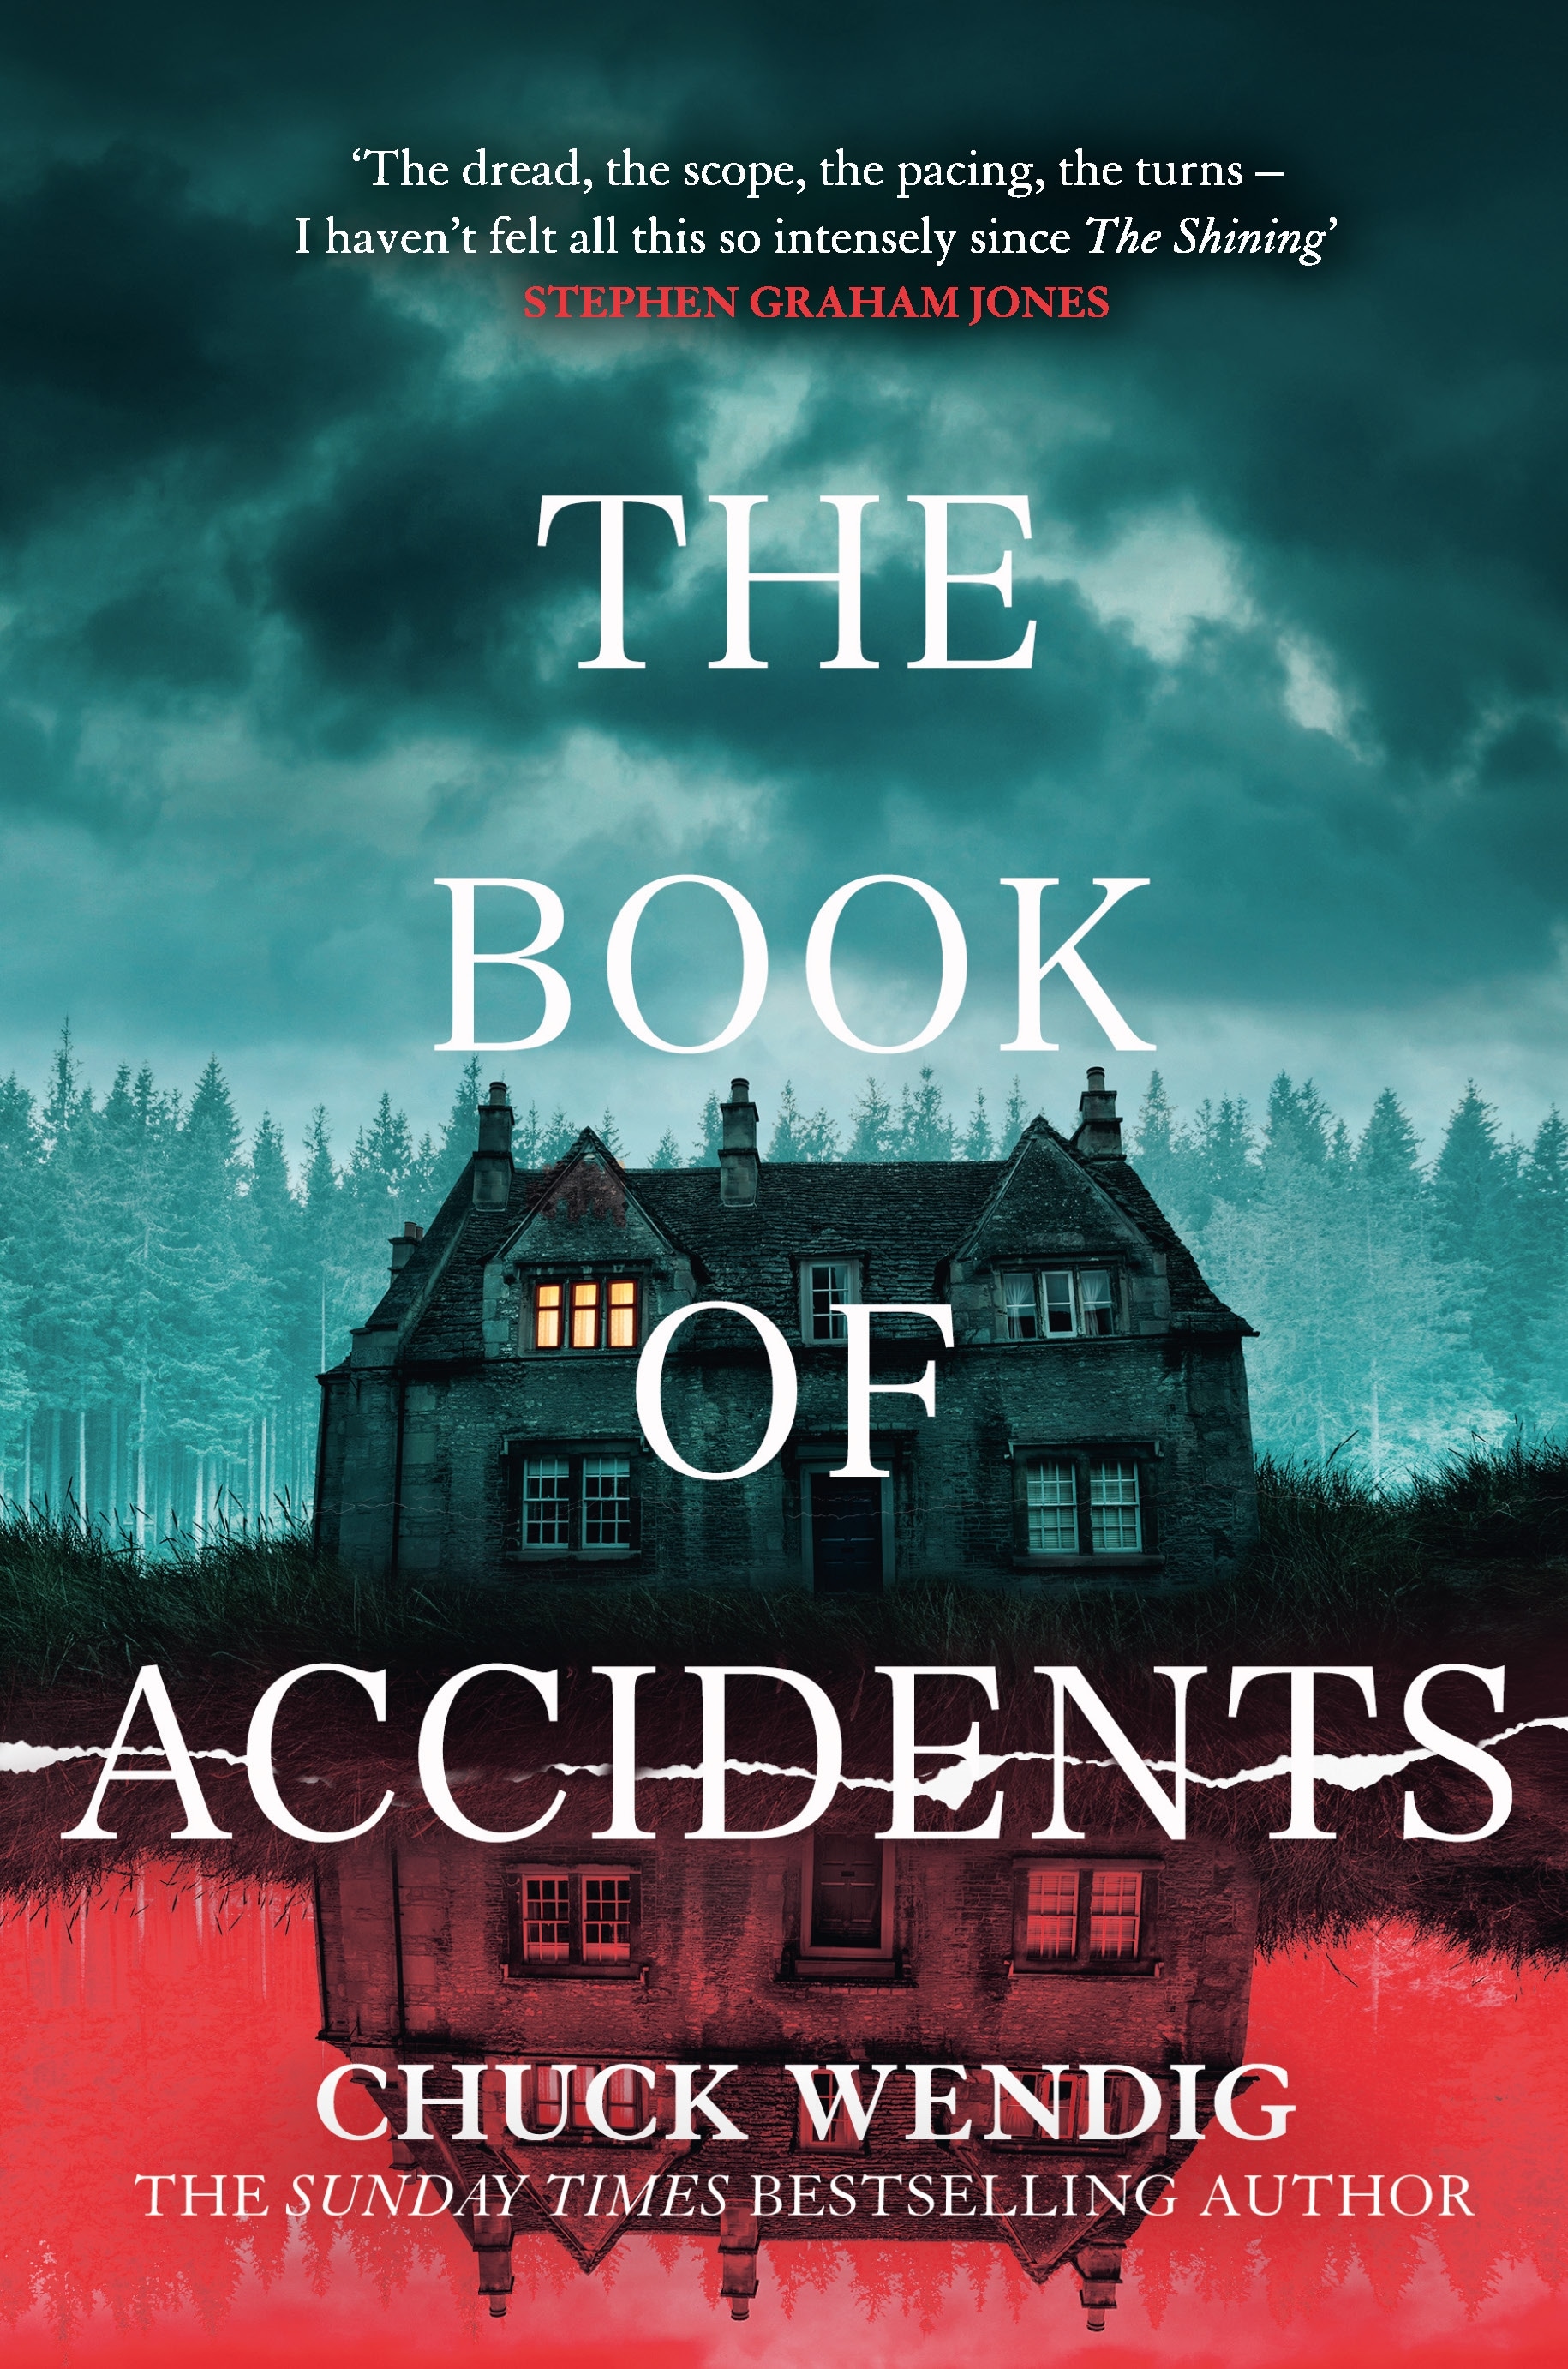 Book “The Book of Accidents” by Chuck Wendig — July 20, 2021